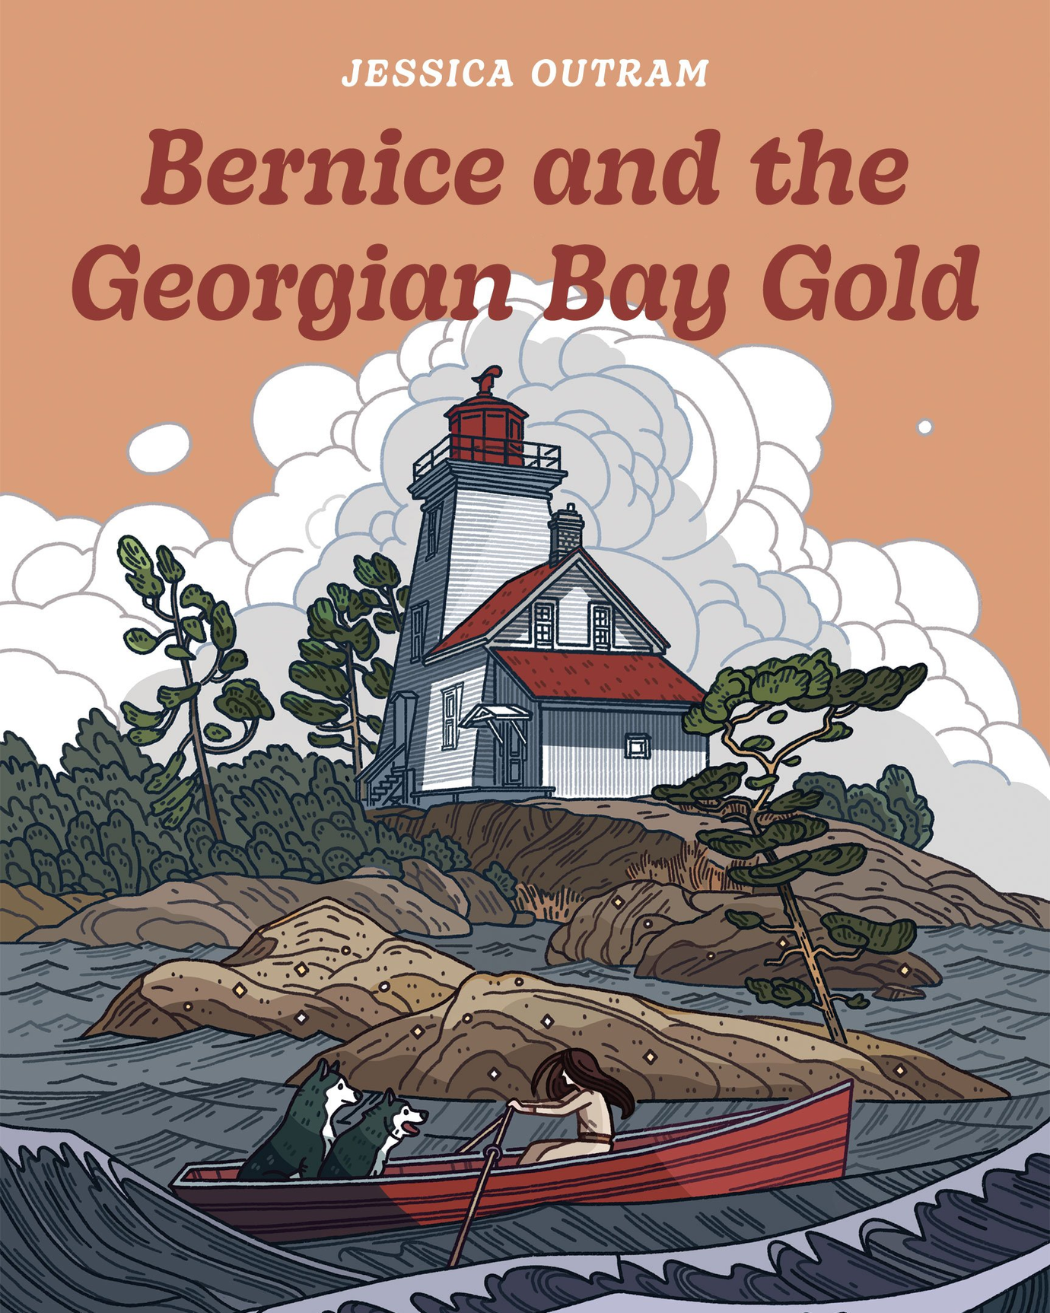 Jessica Outram Bernice and the Georgian Bay Gold